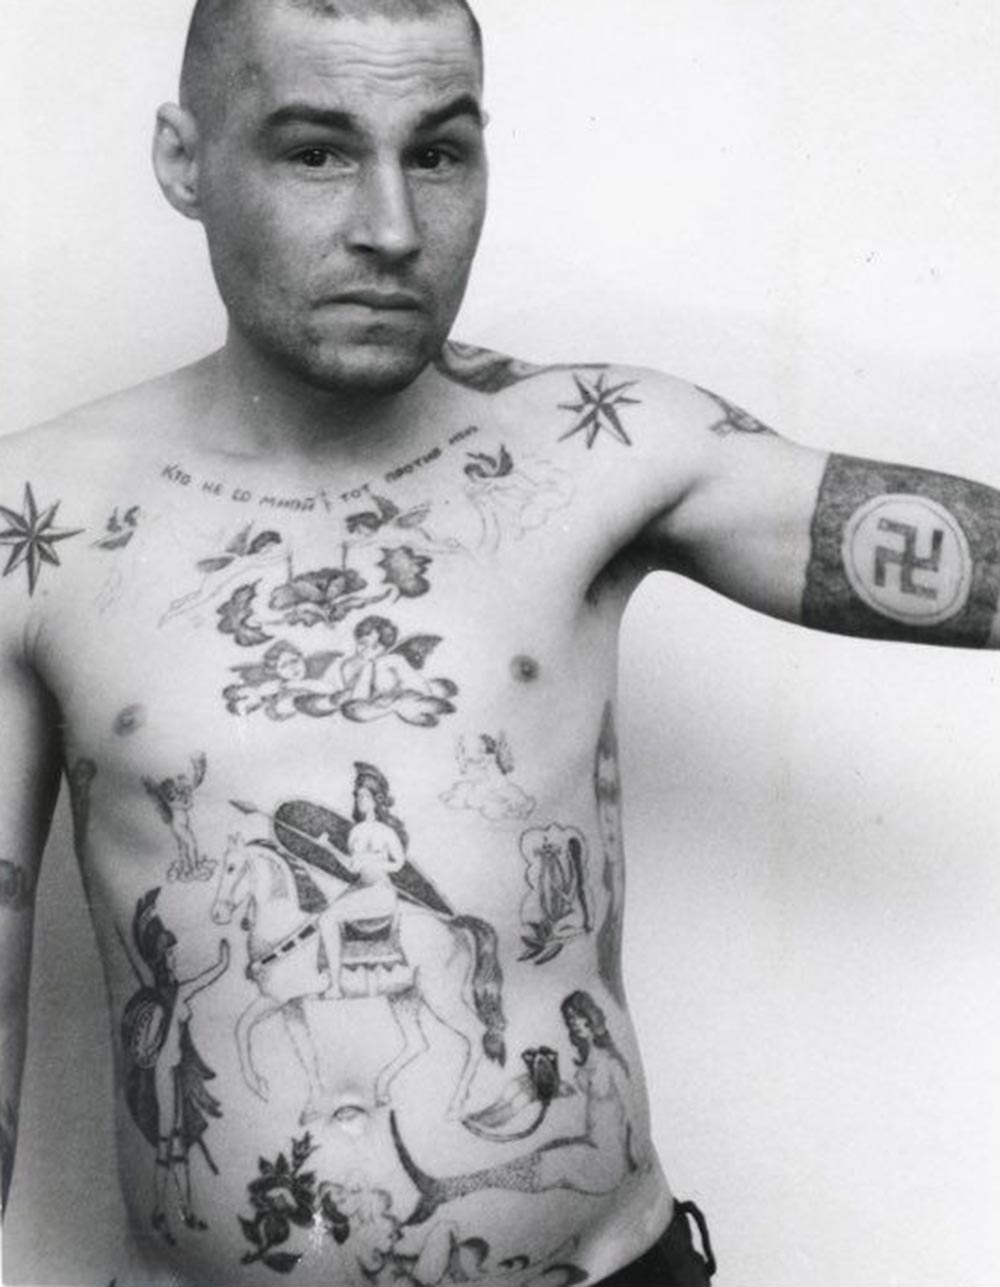 Text across the chest reads ‘He who is not with me is against me.' The swastika and Nazi symbols may mean the owner has fascist sympathies, though they are more usually made as a protest and display of aggression toward the prison or camp administration. During the Soviet period the authorities often removed these tattoos by force either surgically or by using an etching method. A tattoo of a mermaid can indicate a sentence for rape of a minor, or child molestation. In prison jargon the nickname for a person who commits this type of crime is 'amurik,' meaning ‘cupid’, ‘shaggy,' or a universal ‘all rounder.' They are ‘lowered’ in status by being forcibly sodomised by other prisoners, sometimes in groups.